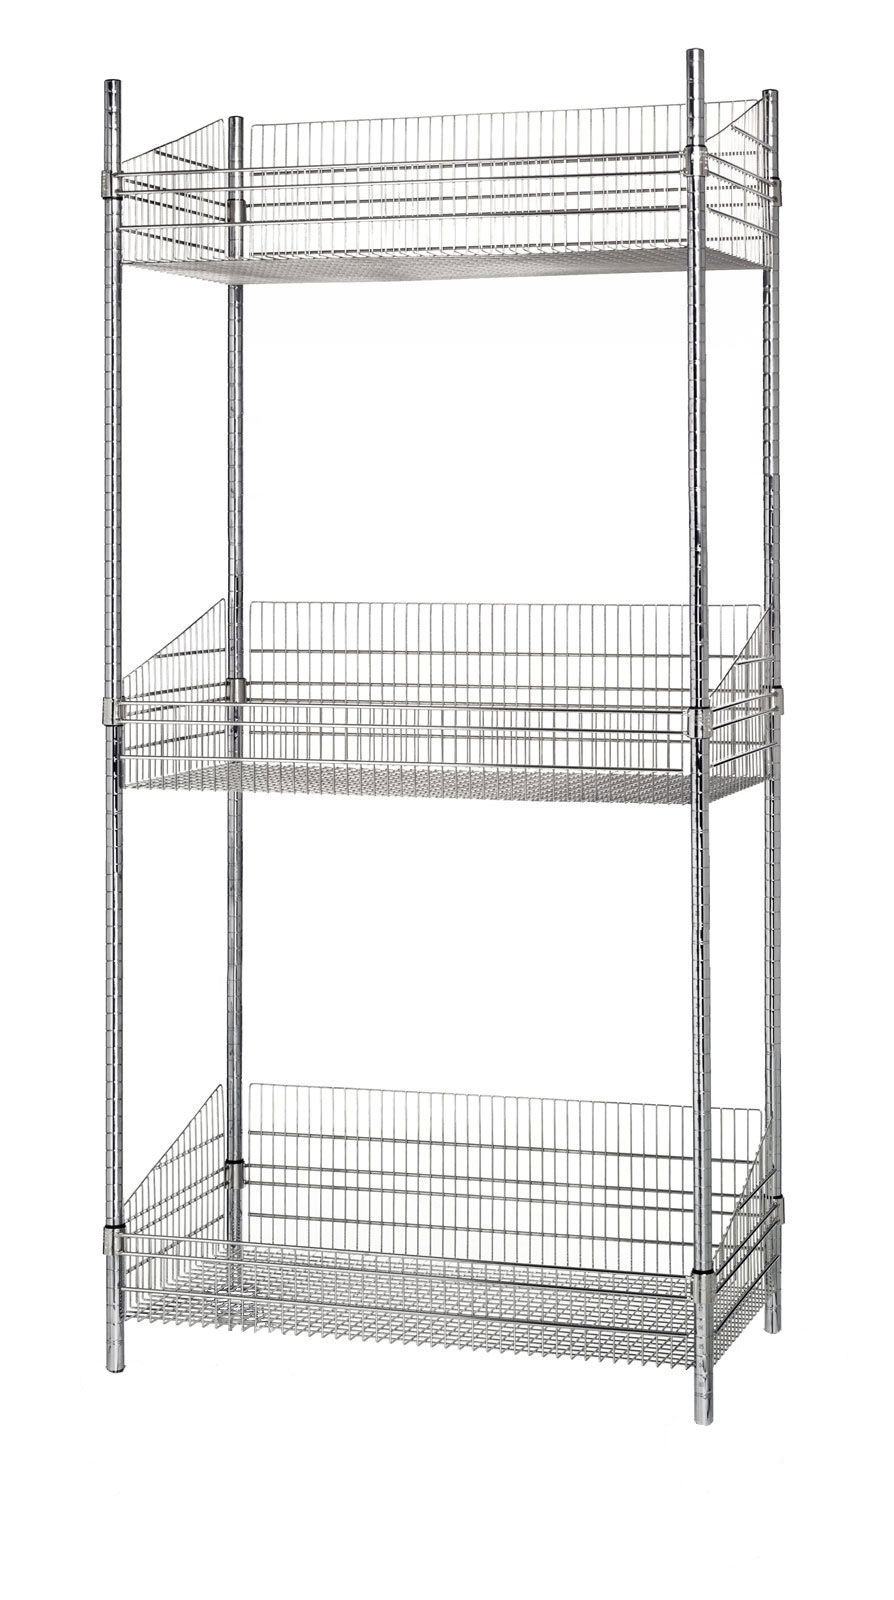 3 Tier Basket Wire Shelving Units